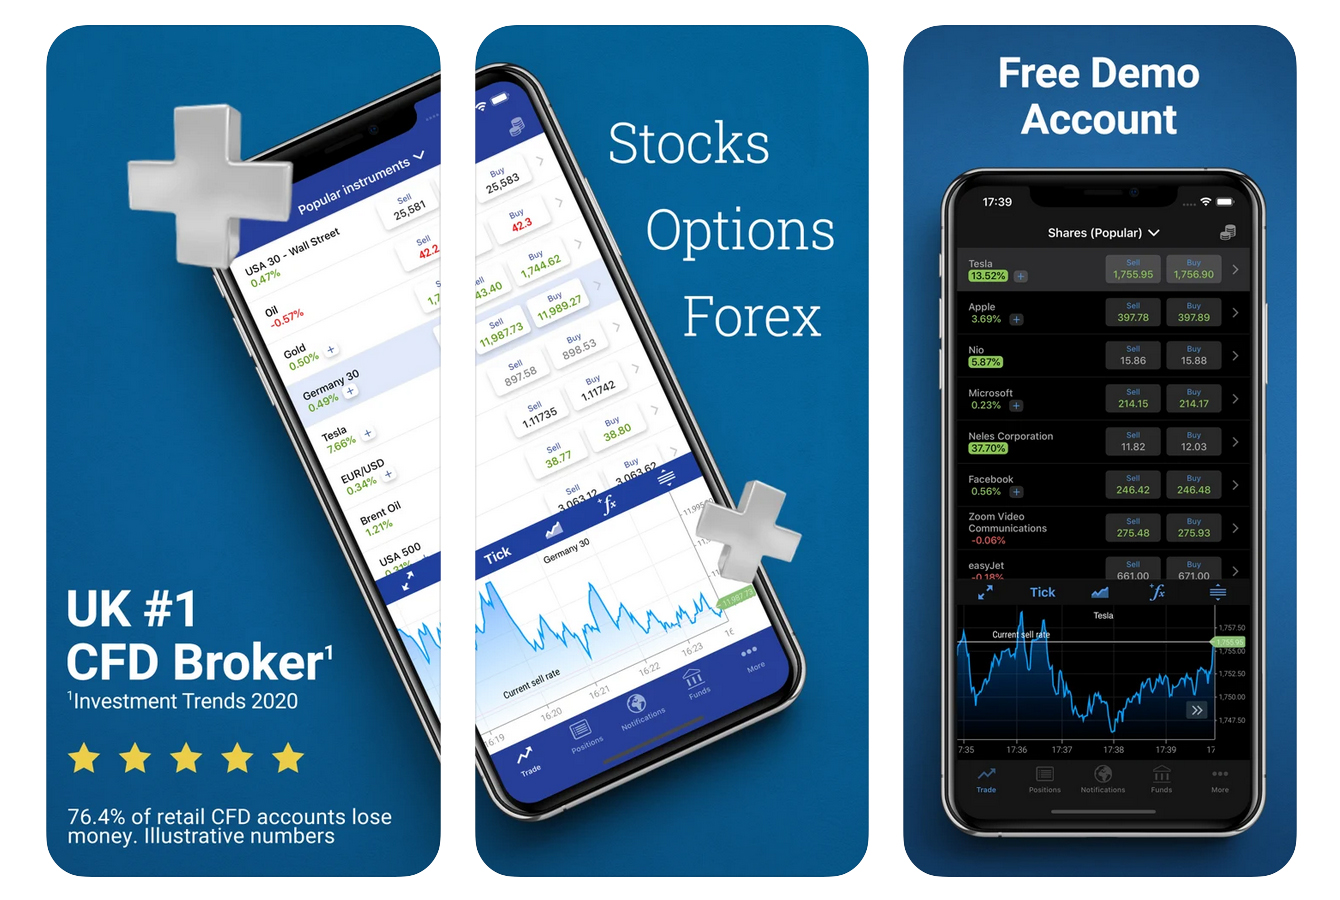 Plus500 – Best for Active Forex Trading